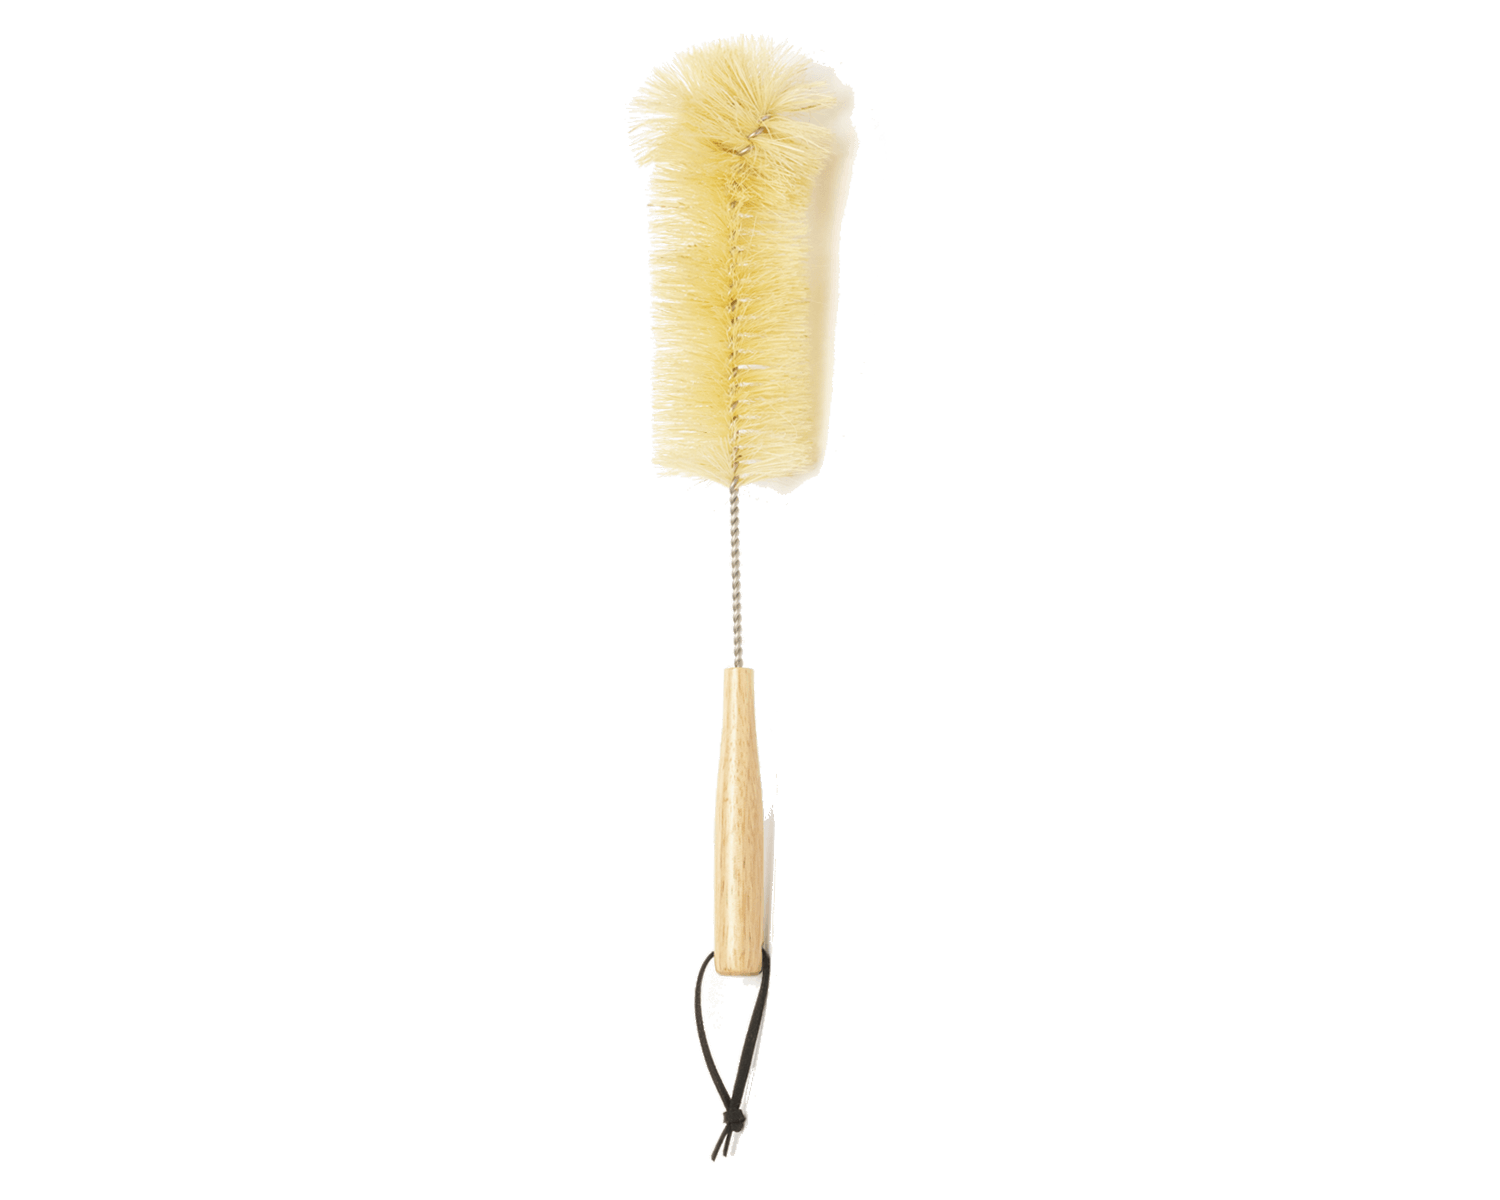 Hitch Bottle Brush with Natural Sisal Fibers, a stainless steel rod, and wooden handle